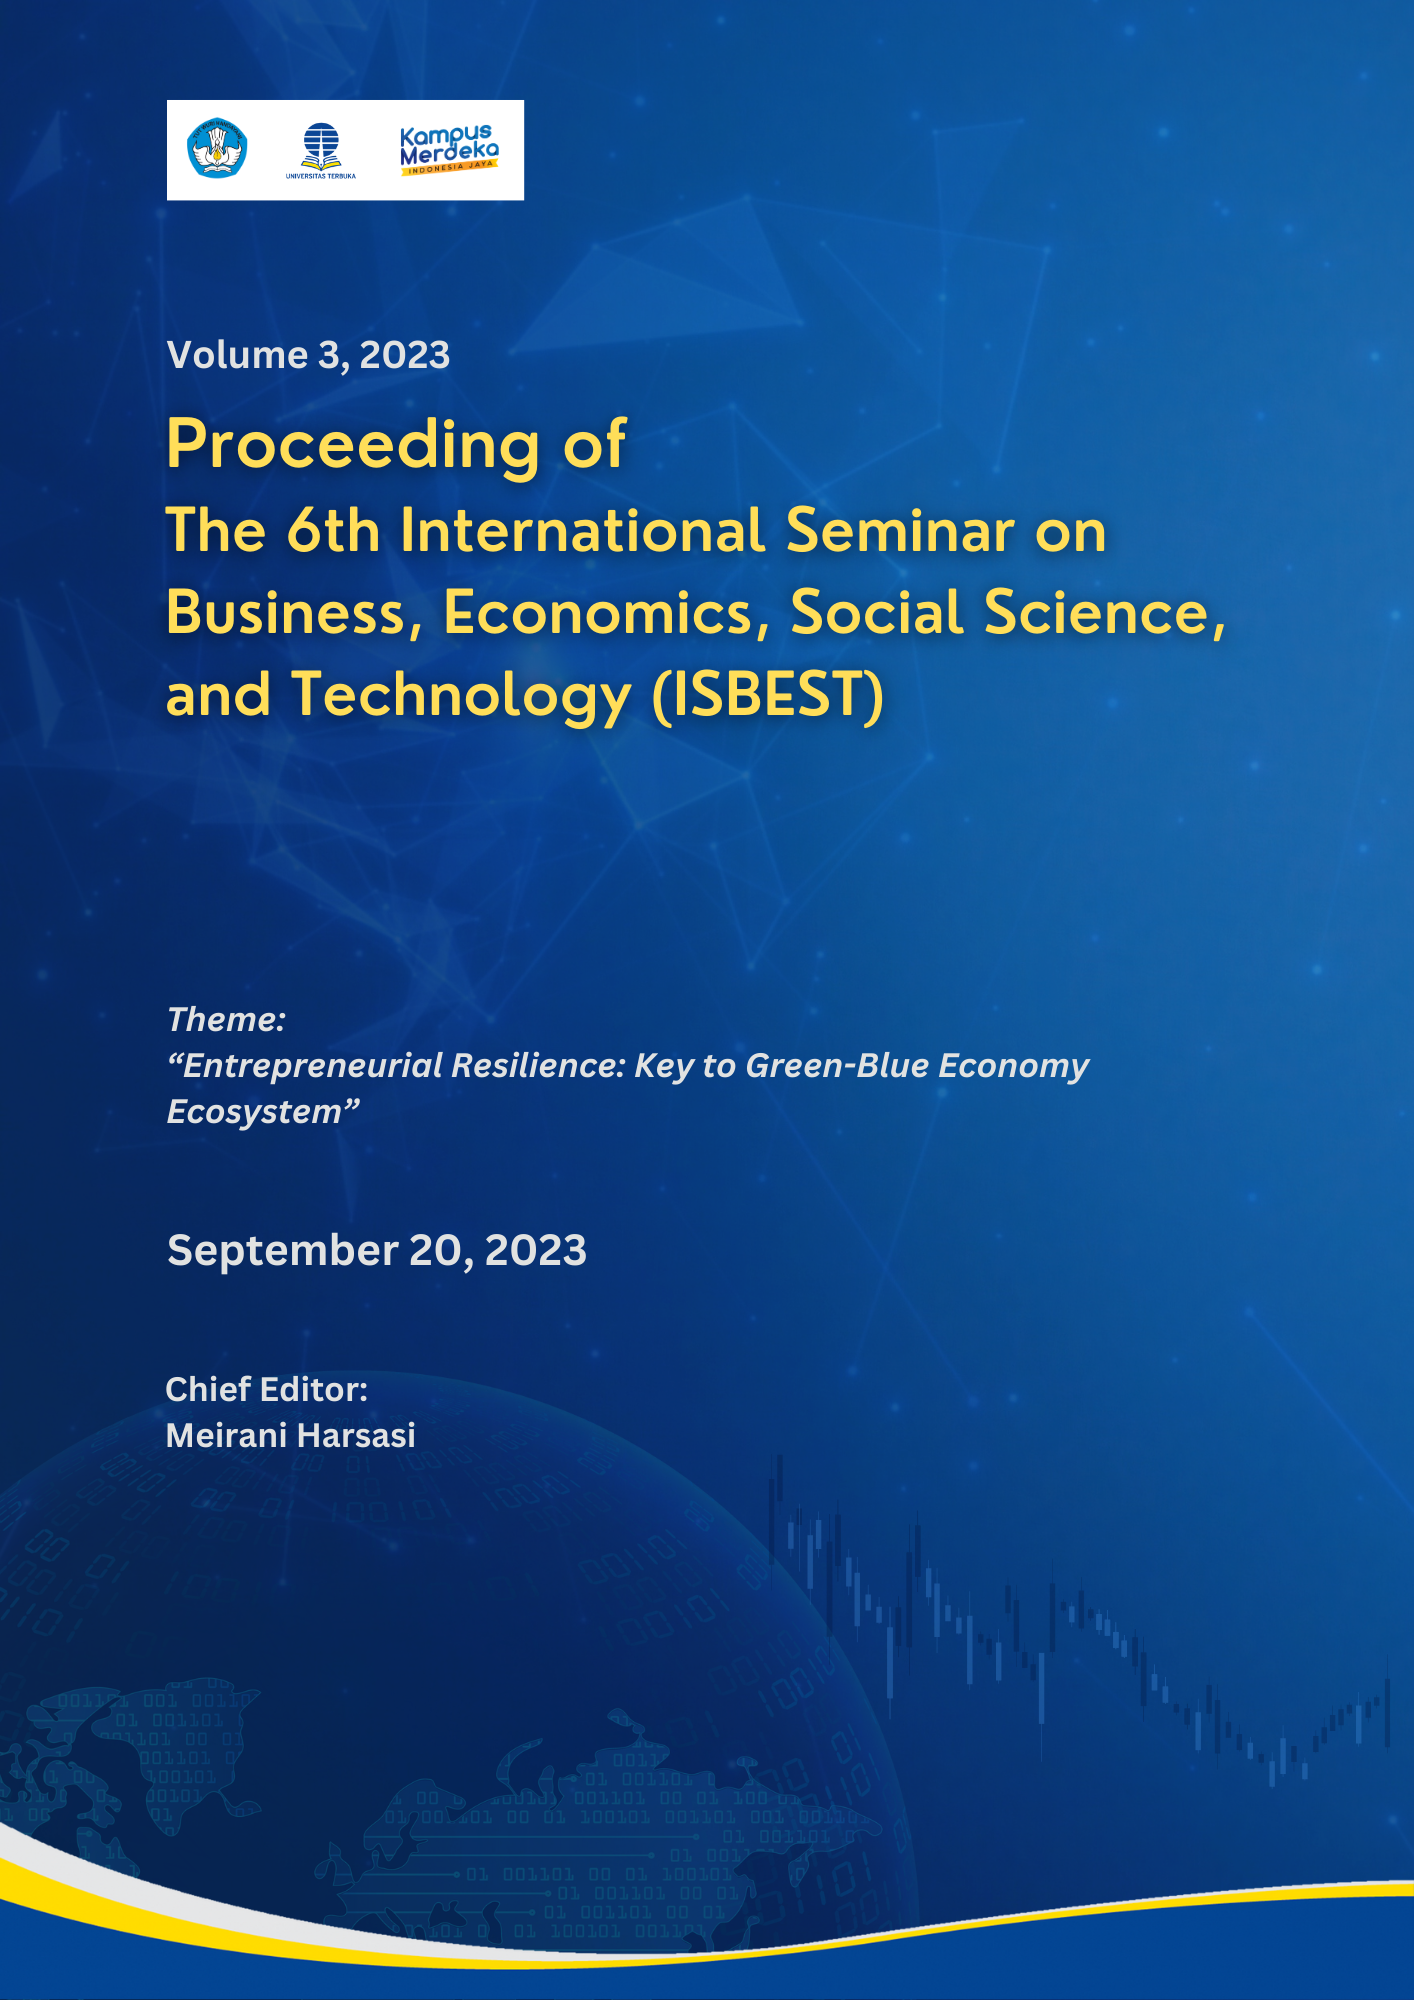 					View Vol. 3 No. 1 (2023): Proceeding of The 6th International Seminar on Business, Economics, Social Science, and Technology (ISBEST)
				